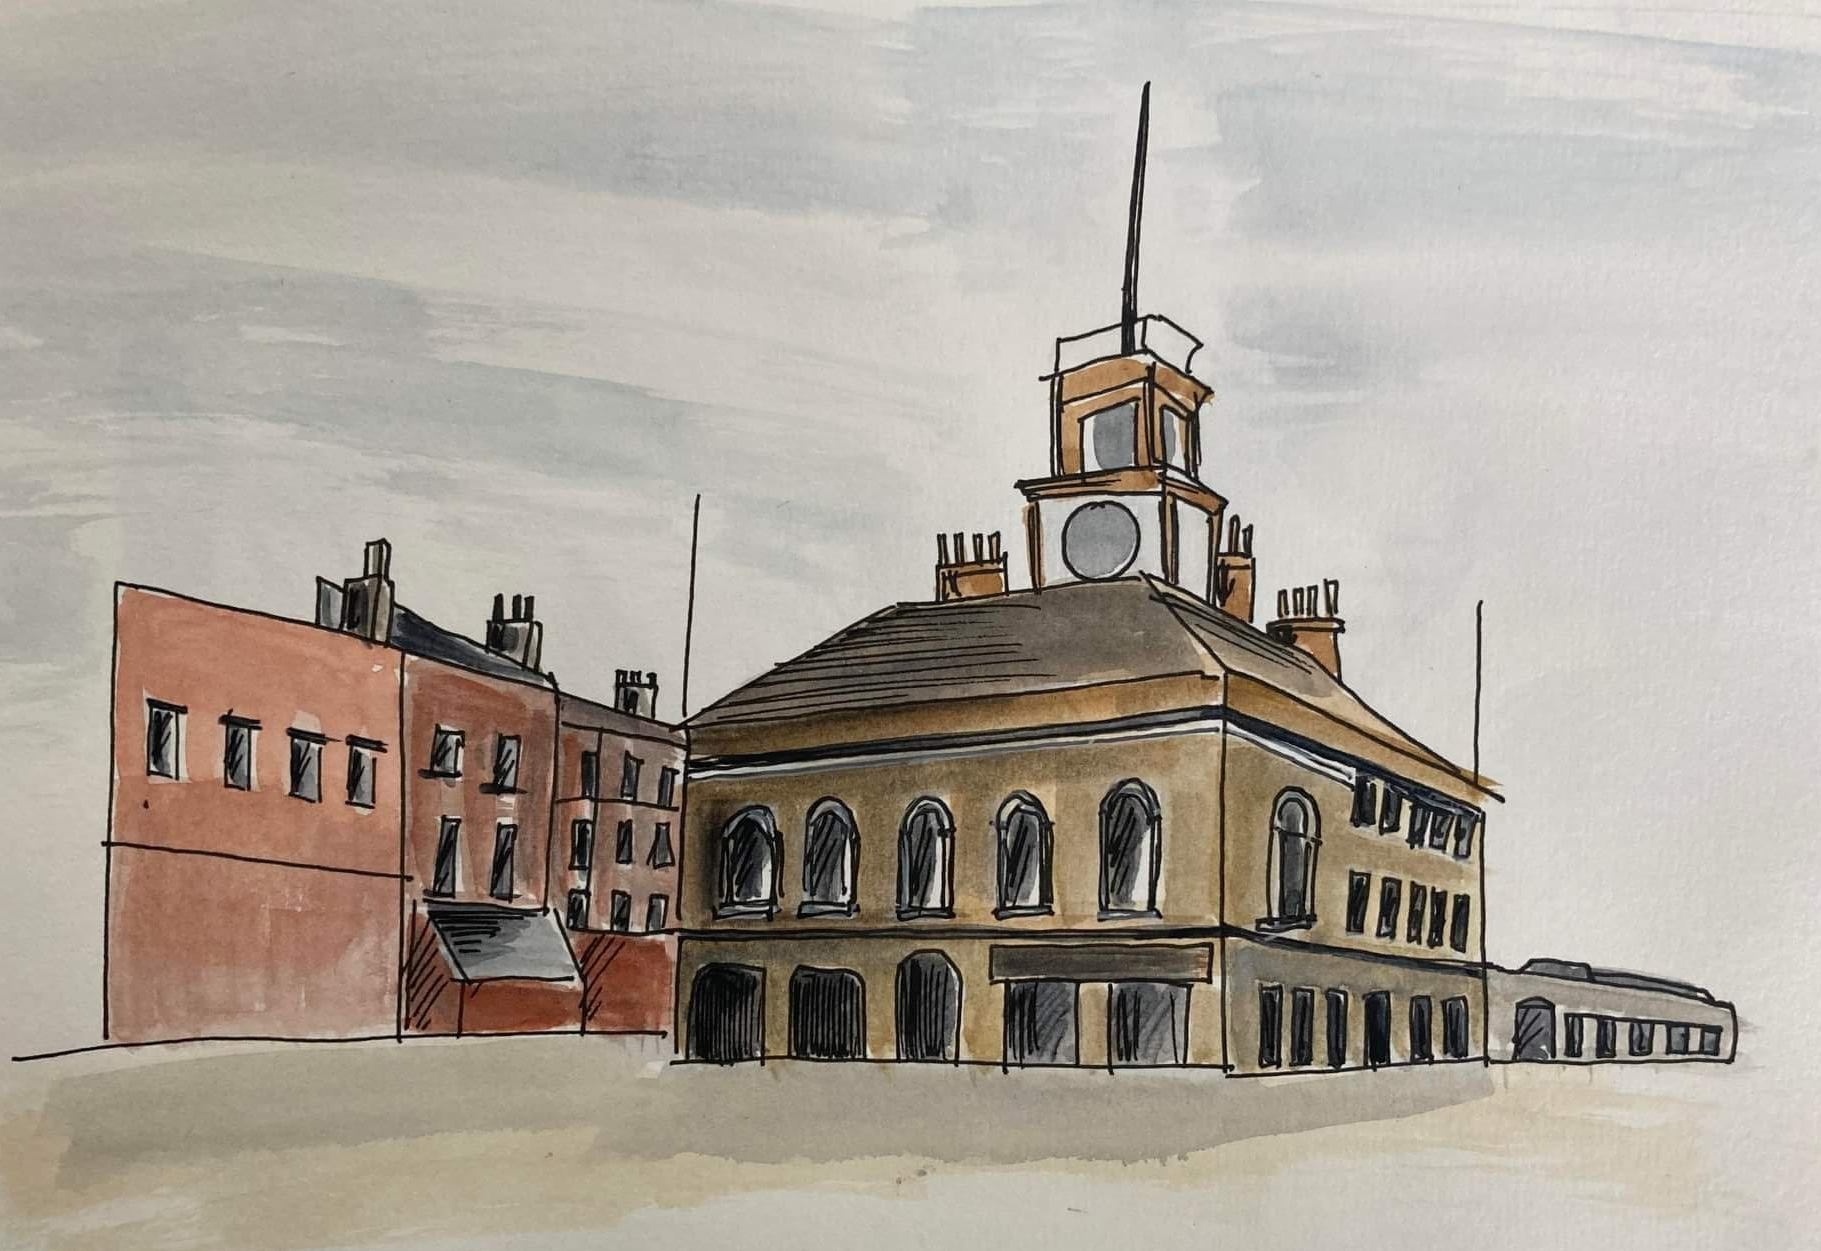 Stockton Town Hall, where the banquet was held in 1822, as drawn by Sandra Johnson for the new film, The First Rail